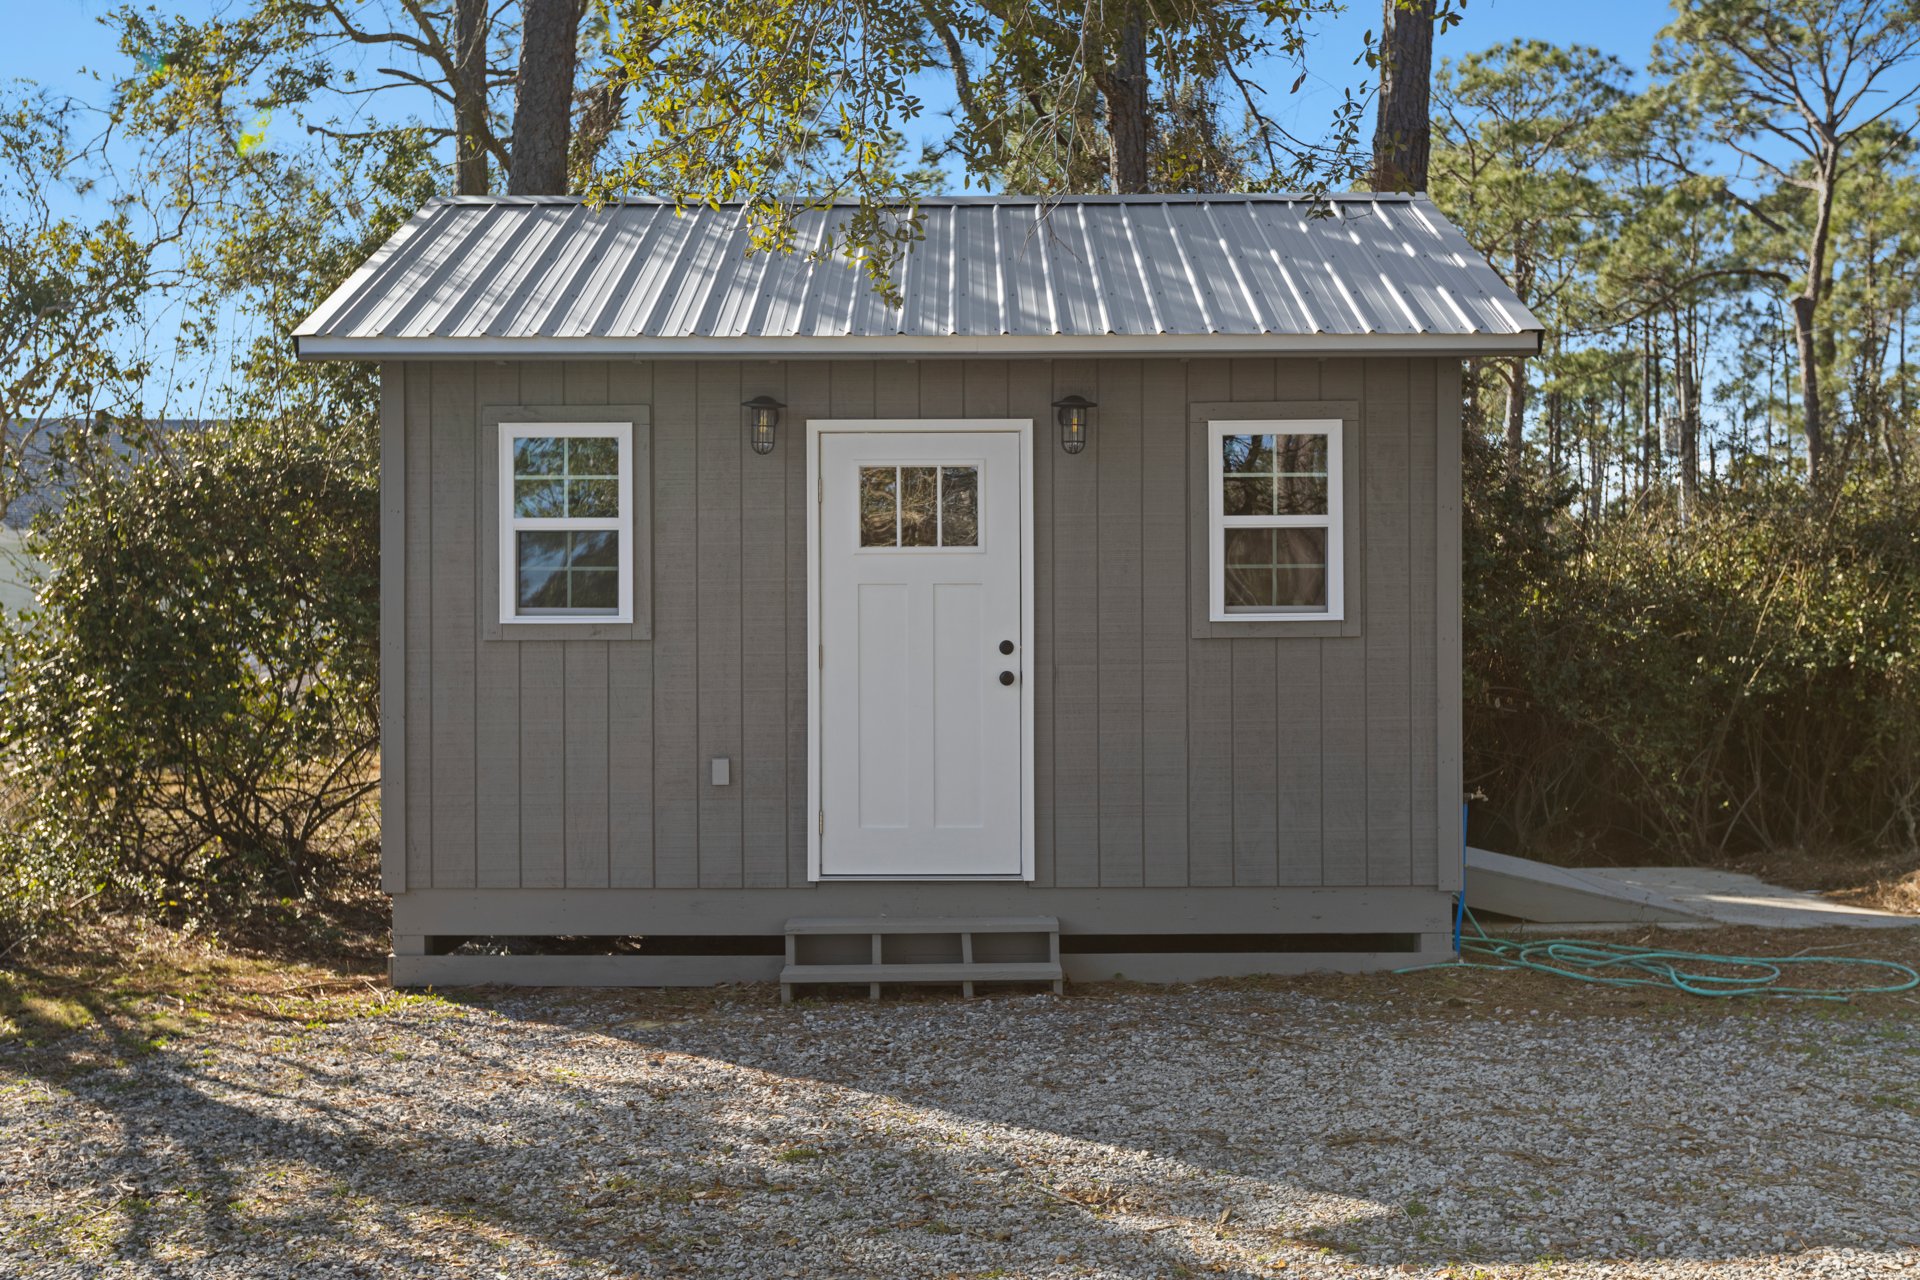 Shed with 2 doors and plenty of storage space